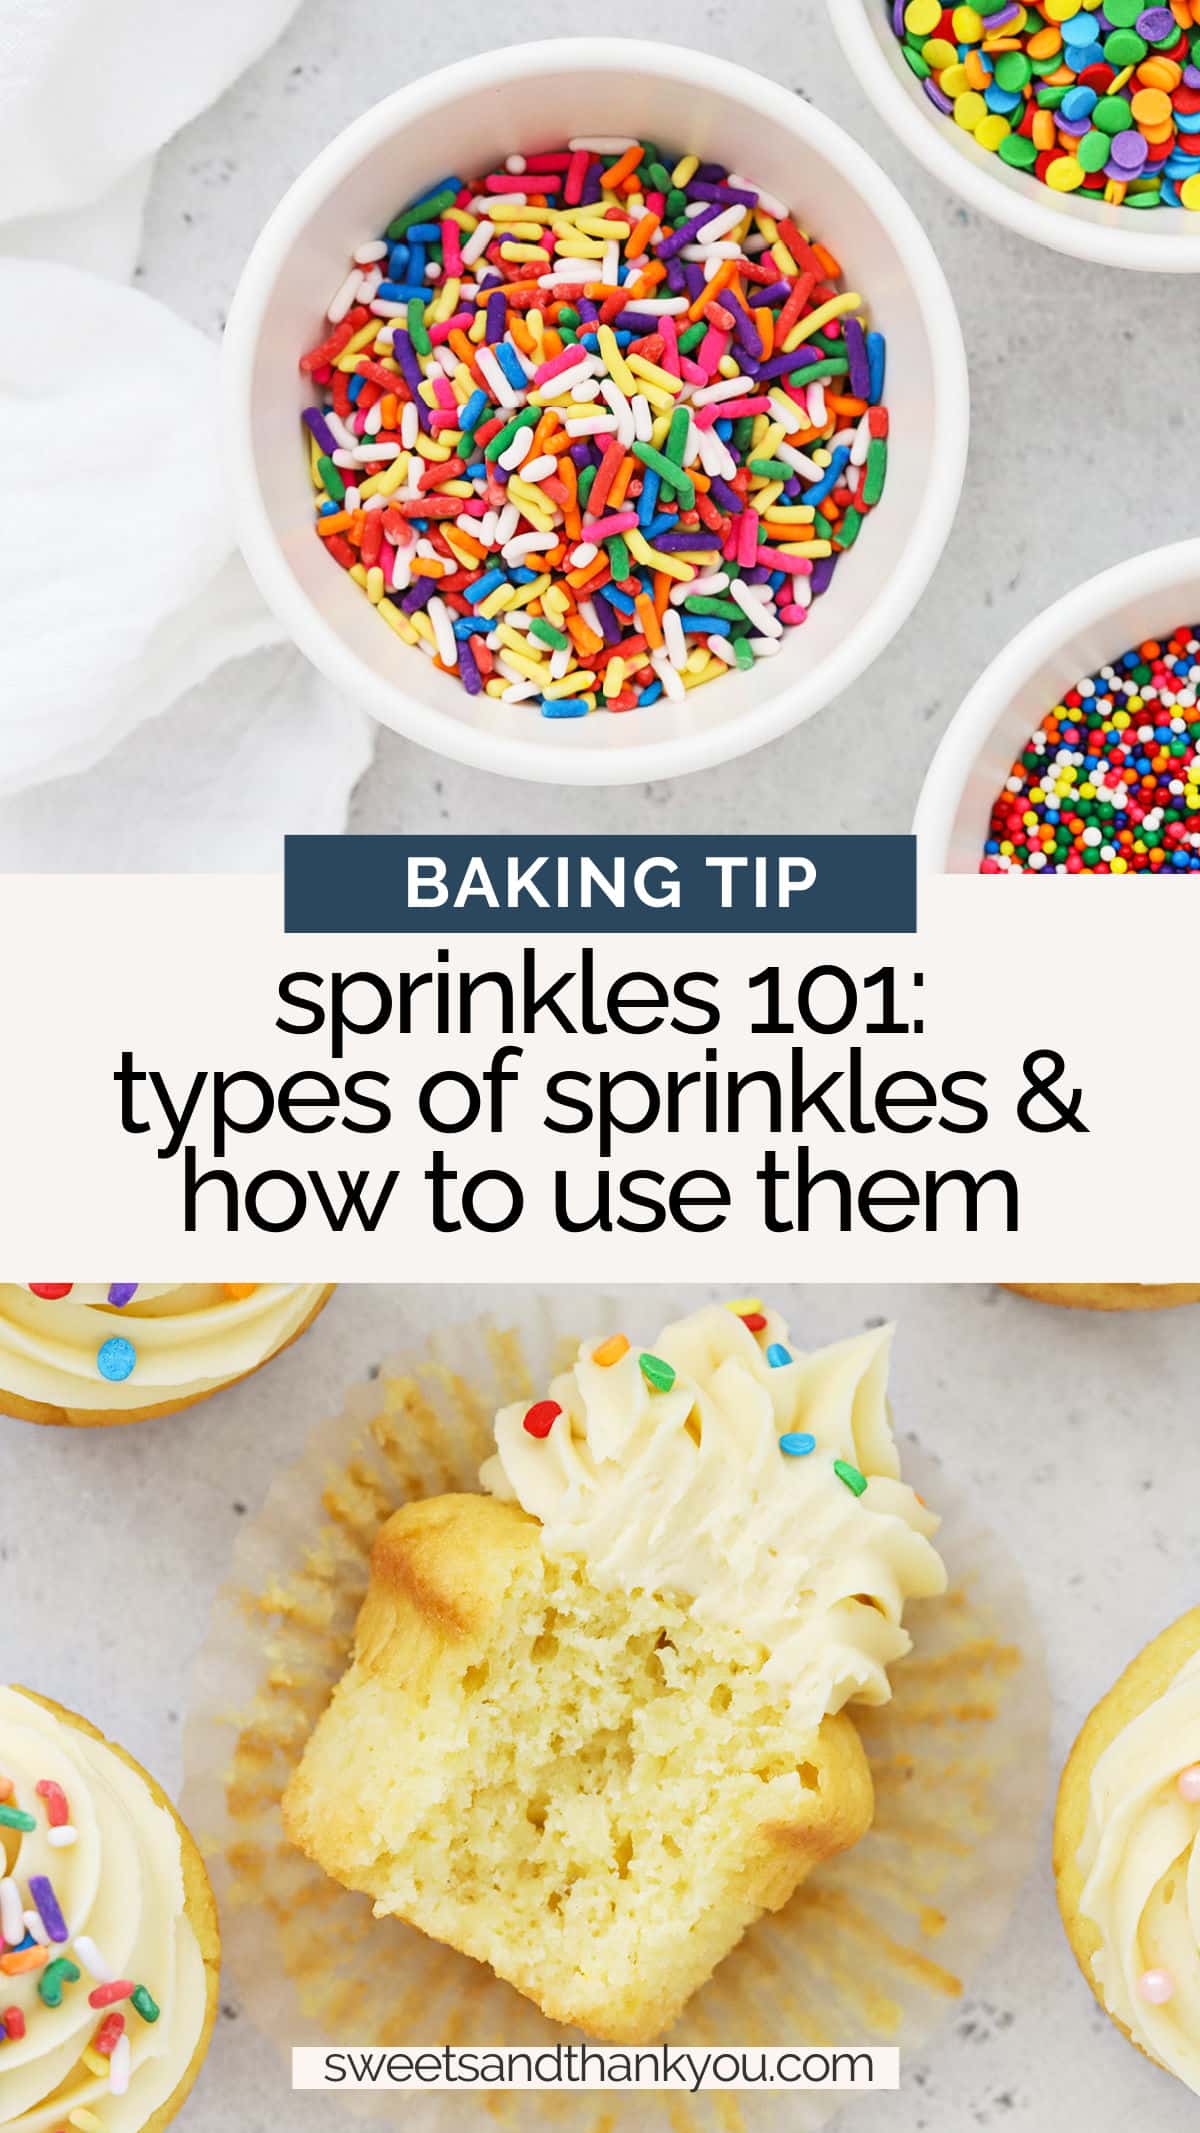 Sprinkles 101 - I'm taking you to sprinkle school today! We'll learn what the different kinds of sprinkles are, how to use them & more! // Types of Sprinkles // Funfetti Sprinkles // Cake Decorating Tips // Cookie Decorating Tips // Gluten Free Baking // Baking Tips // Sweets And Thank You Baking Tips // What Sprinkles Do You Use For Funfetti Cake // Cookie Decorating // Cake Decorating // Gluten Free Sprinkles // What Sprinkles Are Gluten Free